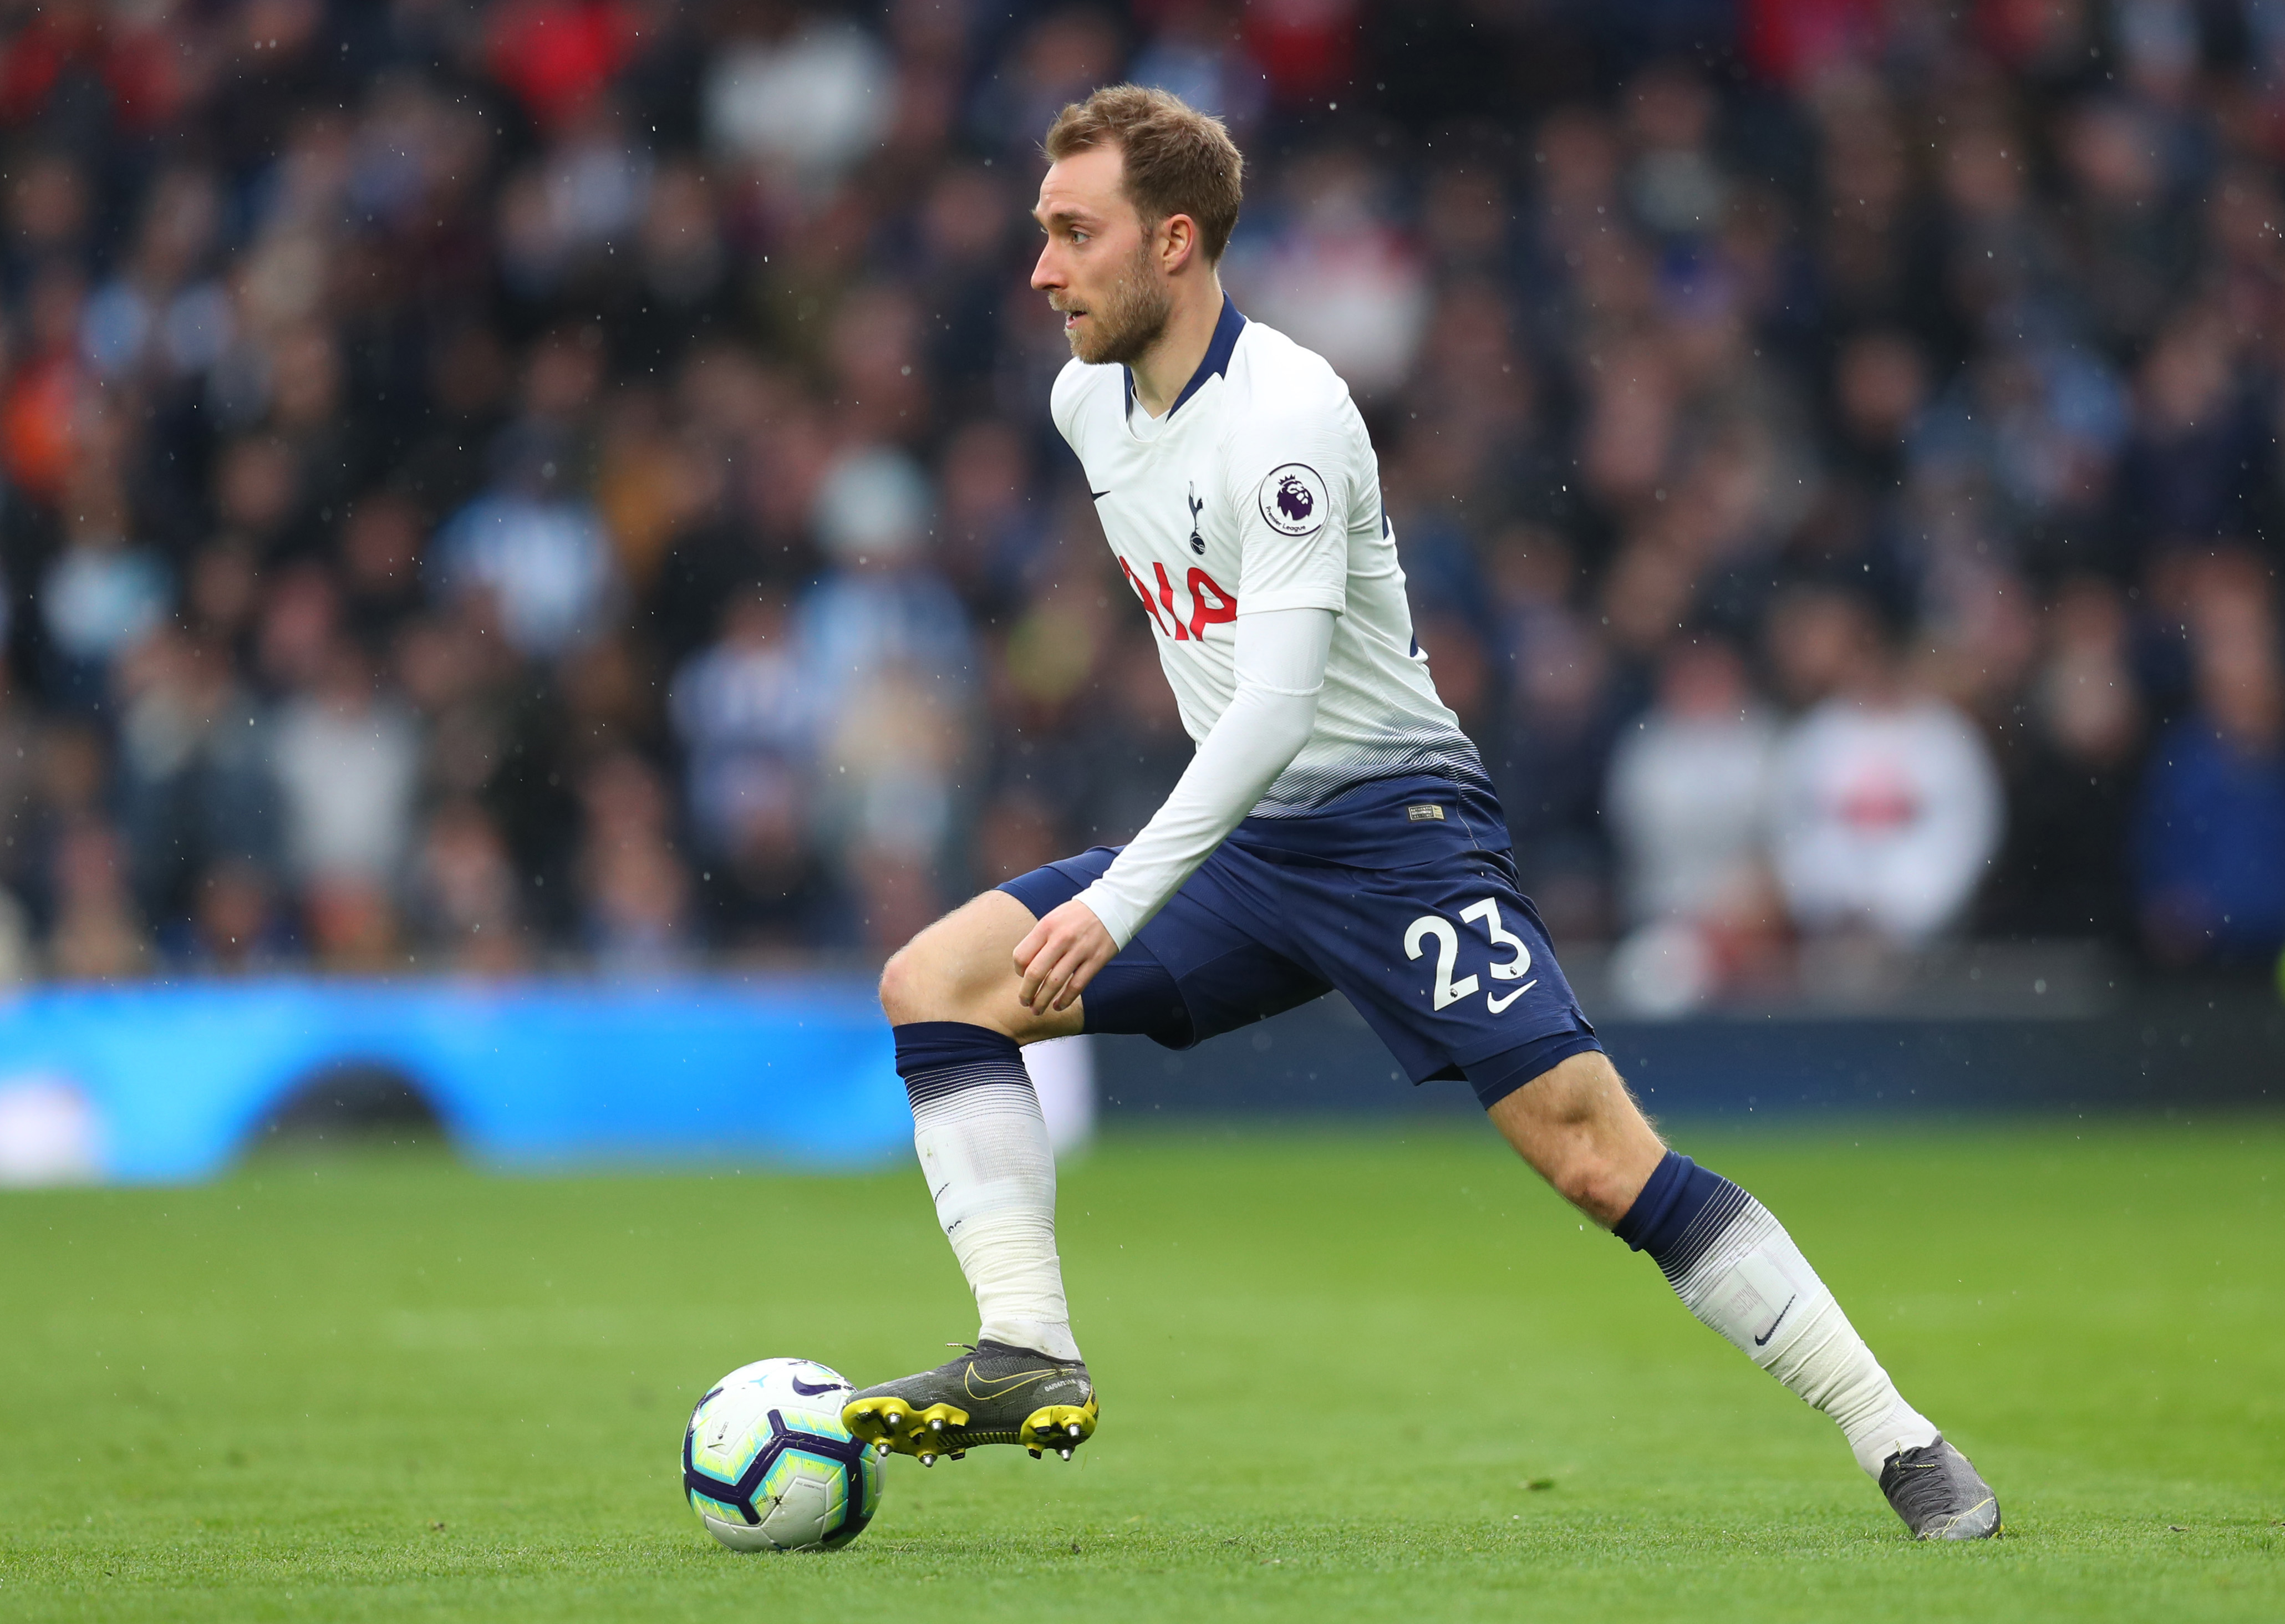 Manchester United want Eriksen after coling their interest in Bruno Fernandes. (Photo courtesy: AFP/Getty)